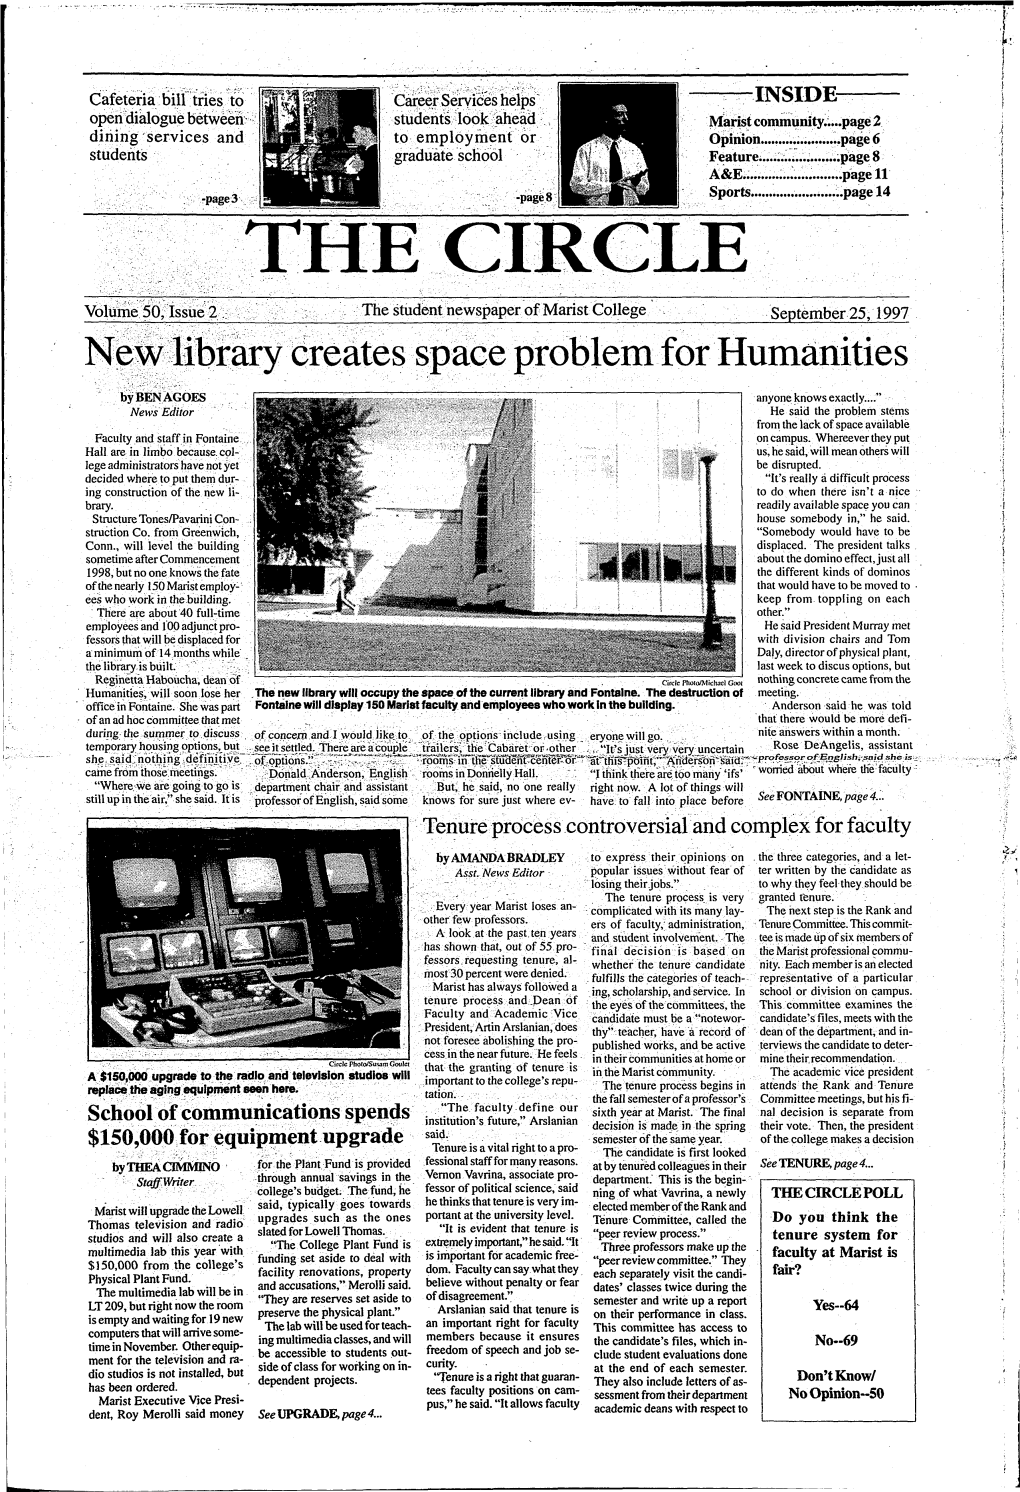 THE CIRCLE Volume 50, Issue 2 the Student Newspaper of Marist College September 25,1997 New Library Creates Space Problem for Humanities